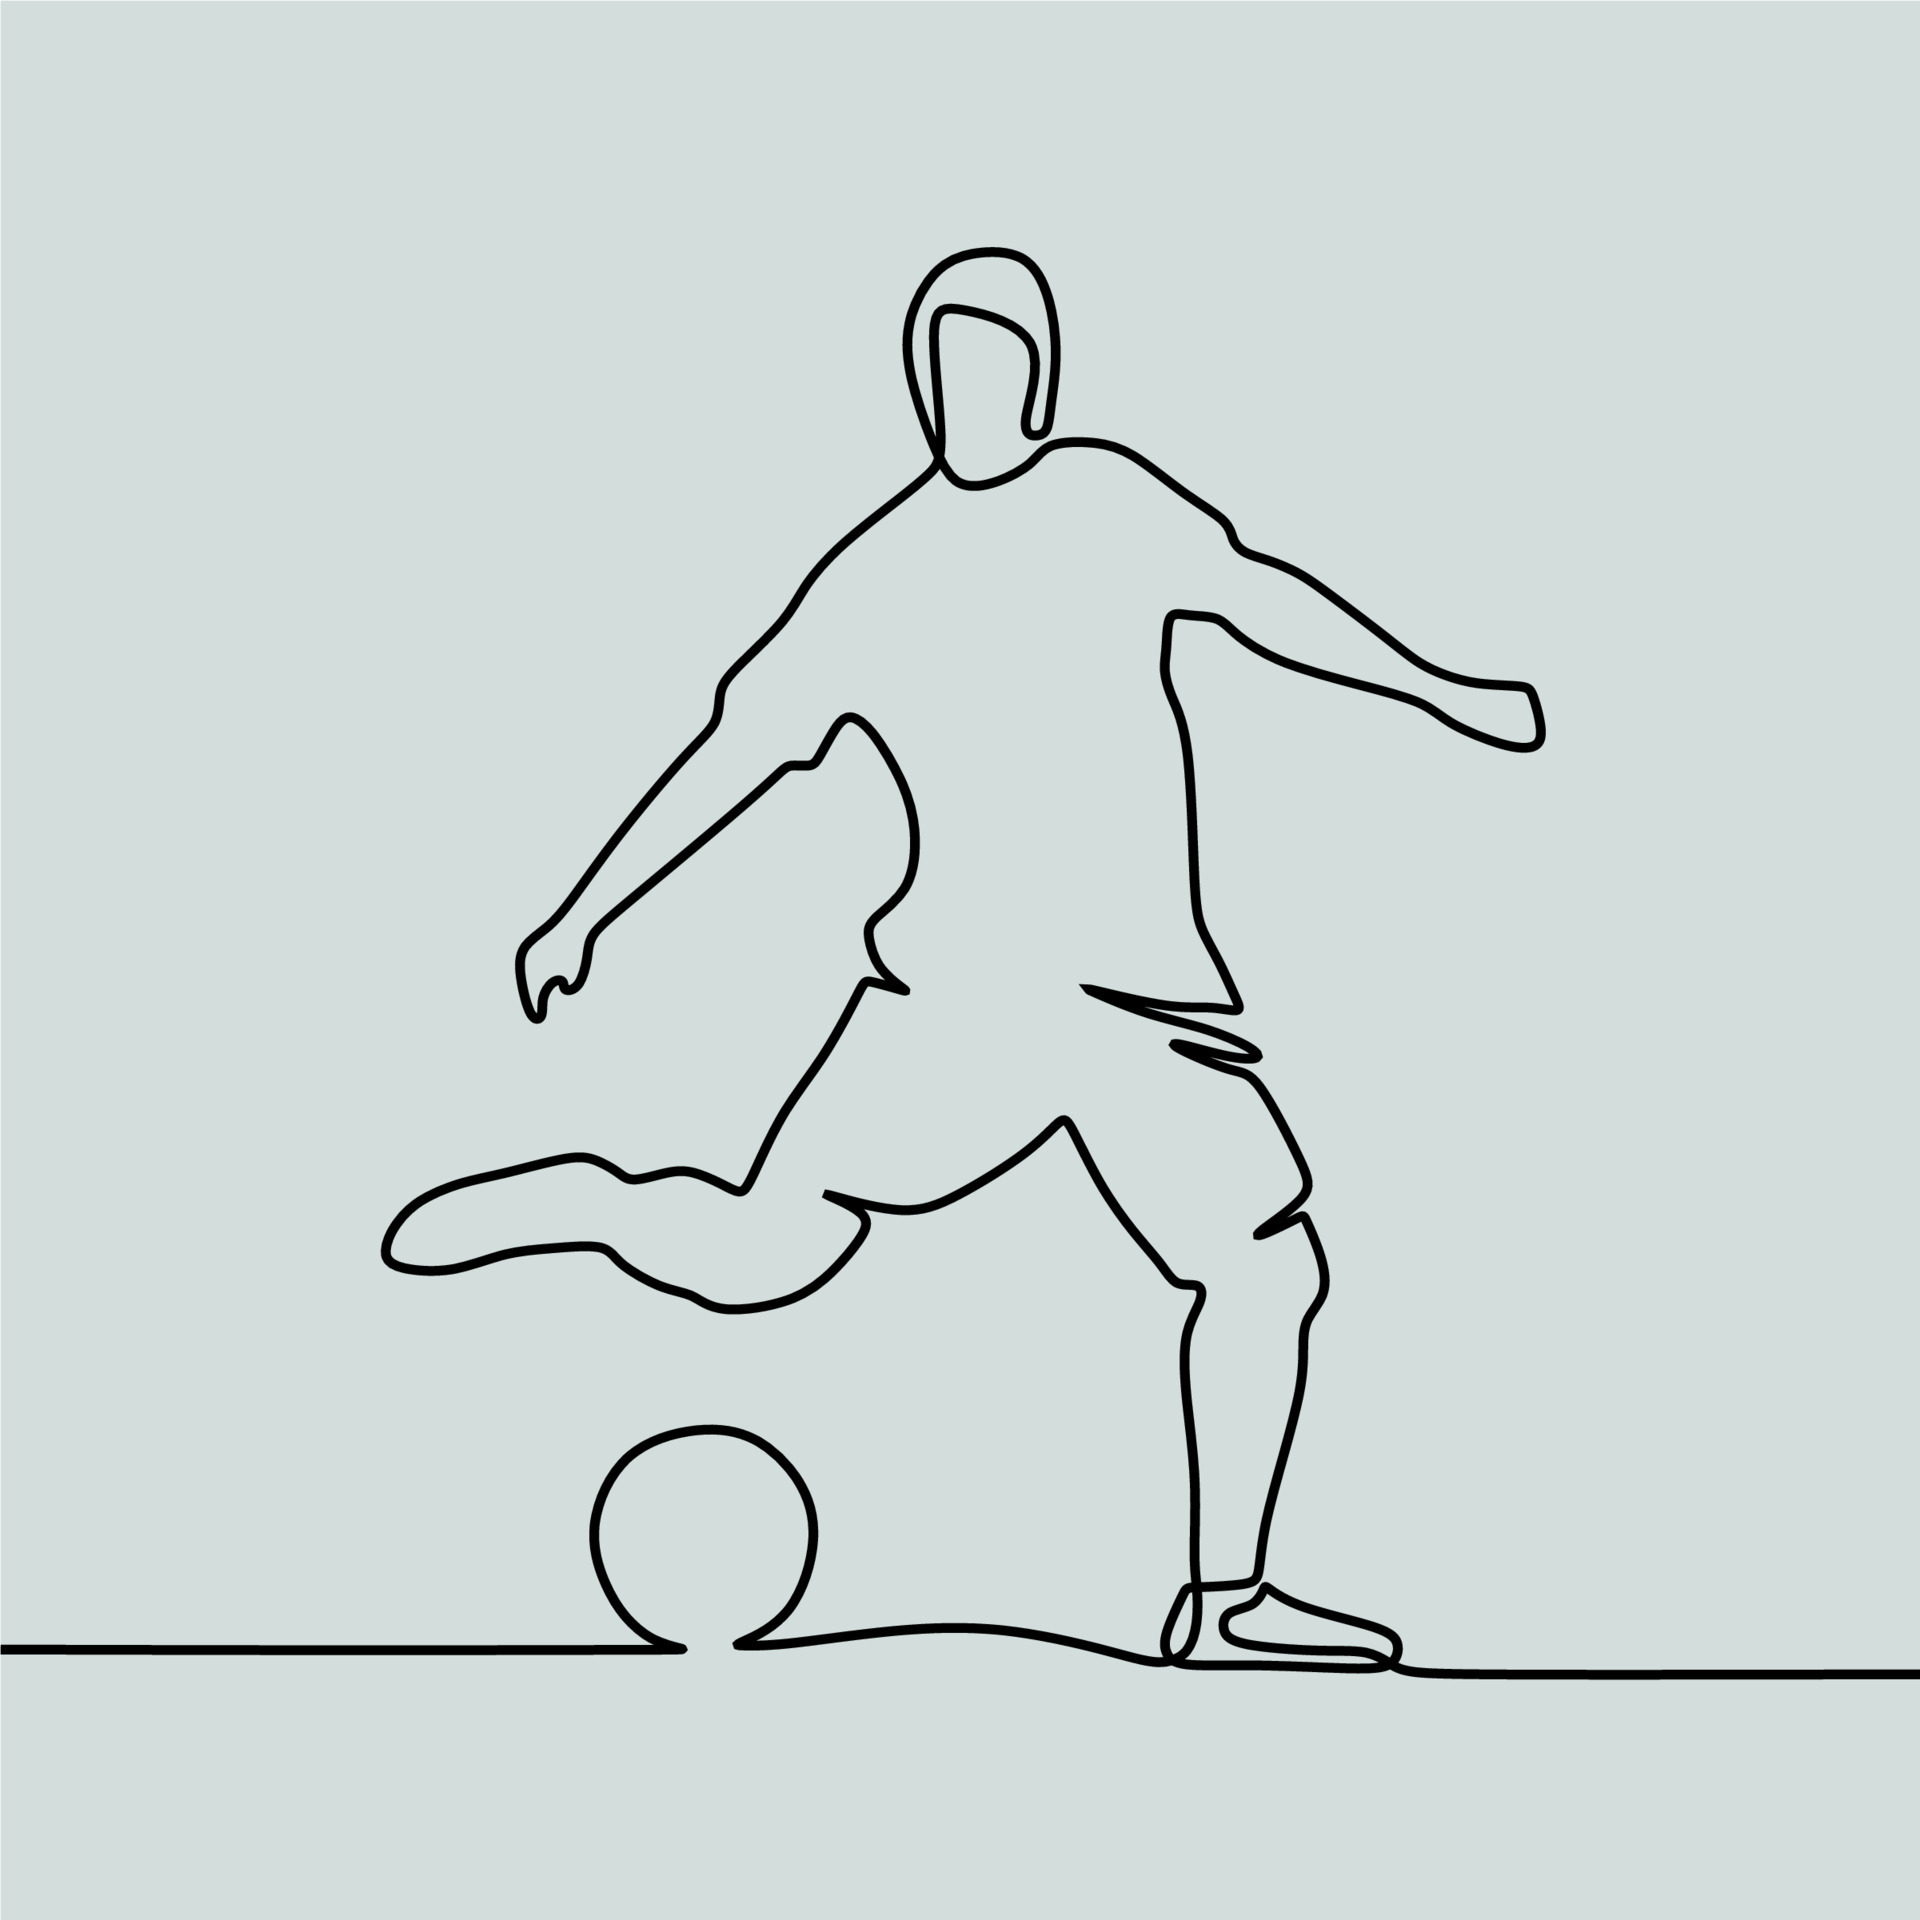 How to Draw a Football | Design School